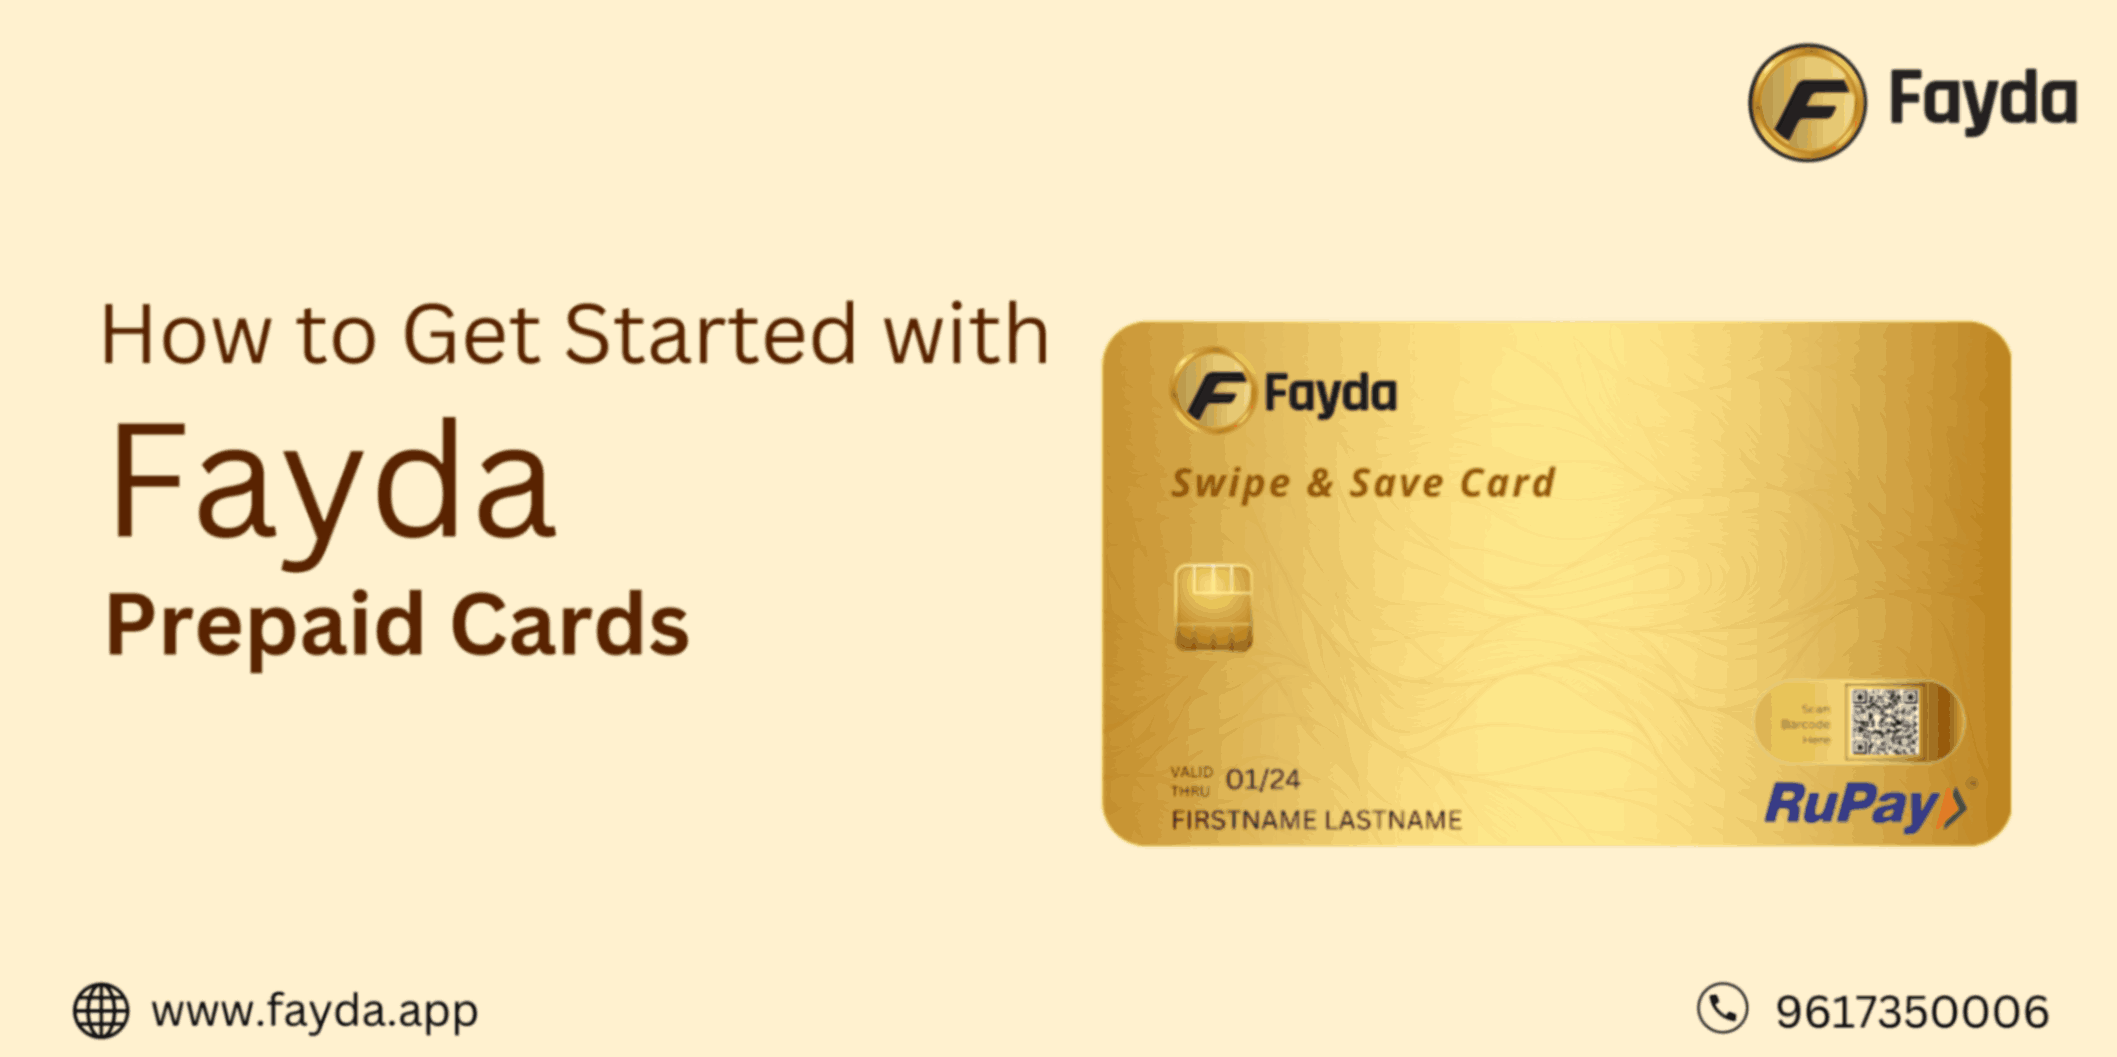 How to Get Started with Fayda Prepaid Card